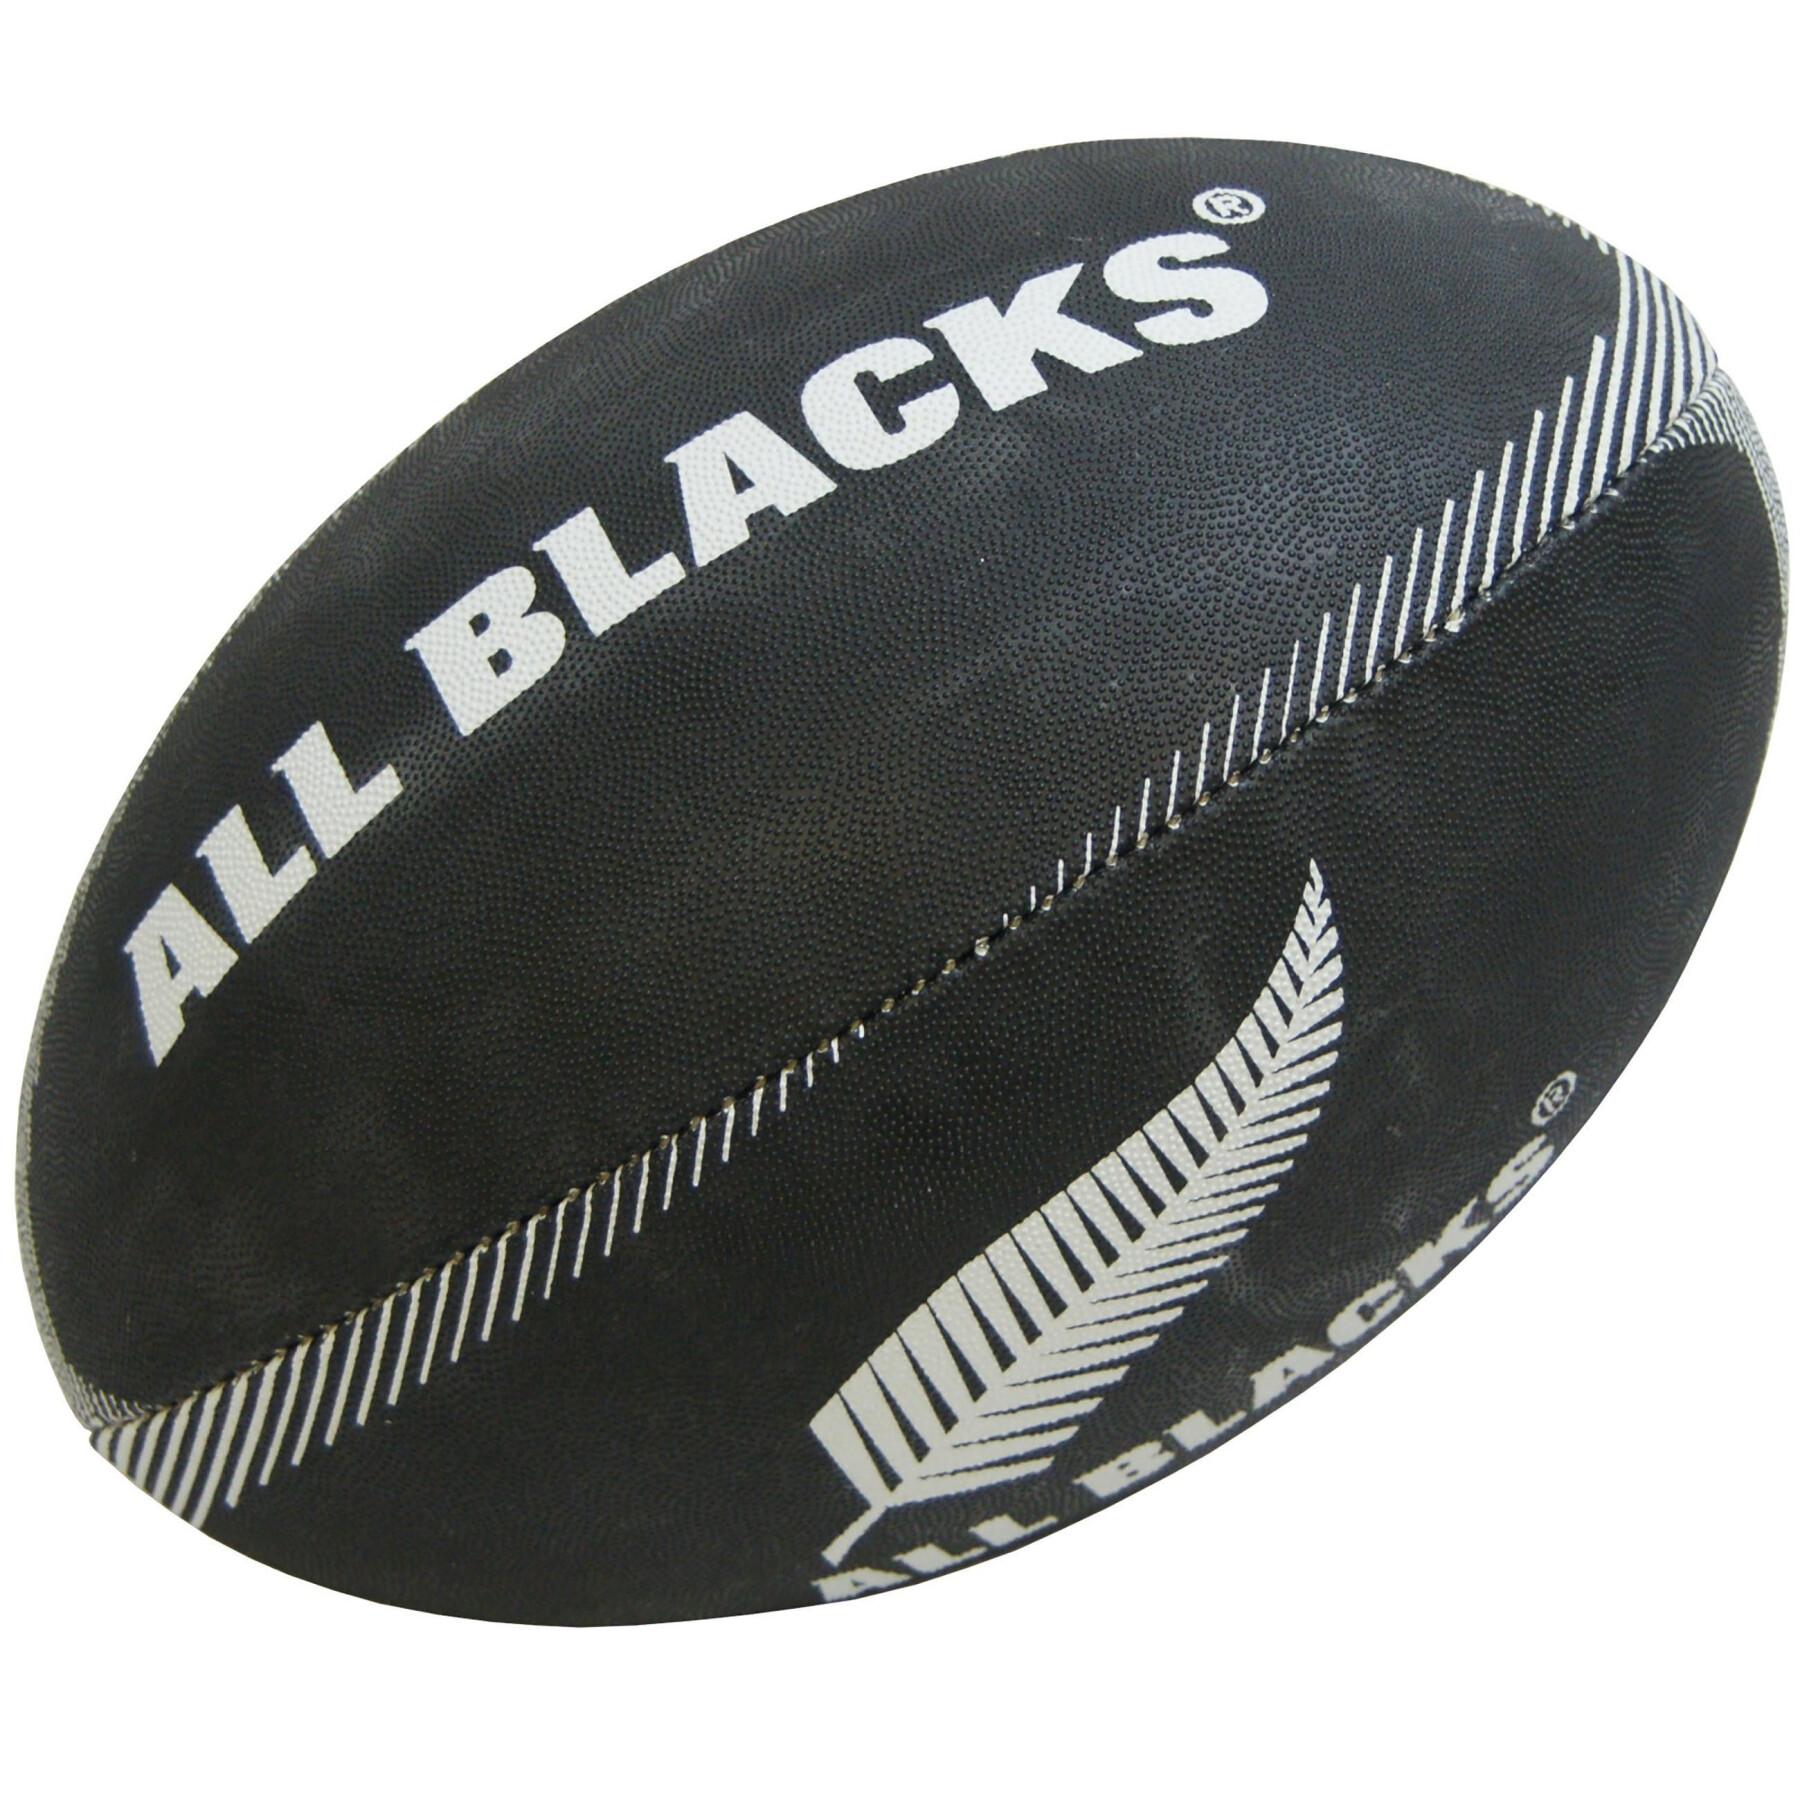 Pack of 25 Rugby balls All Blacks supporter Gilbert